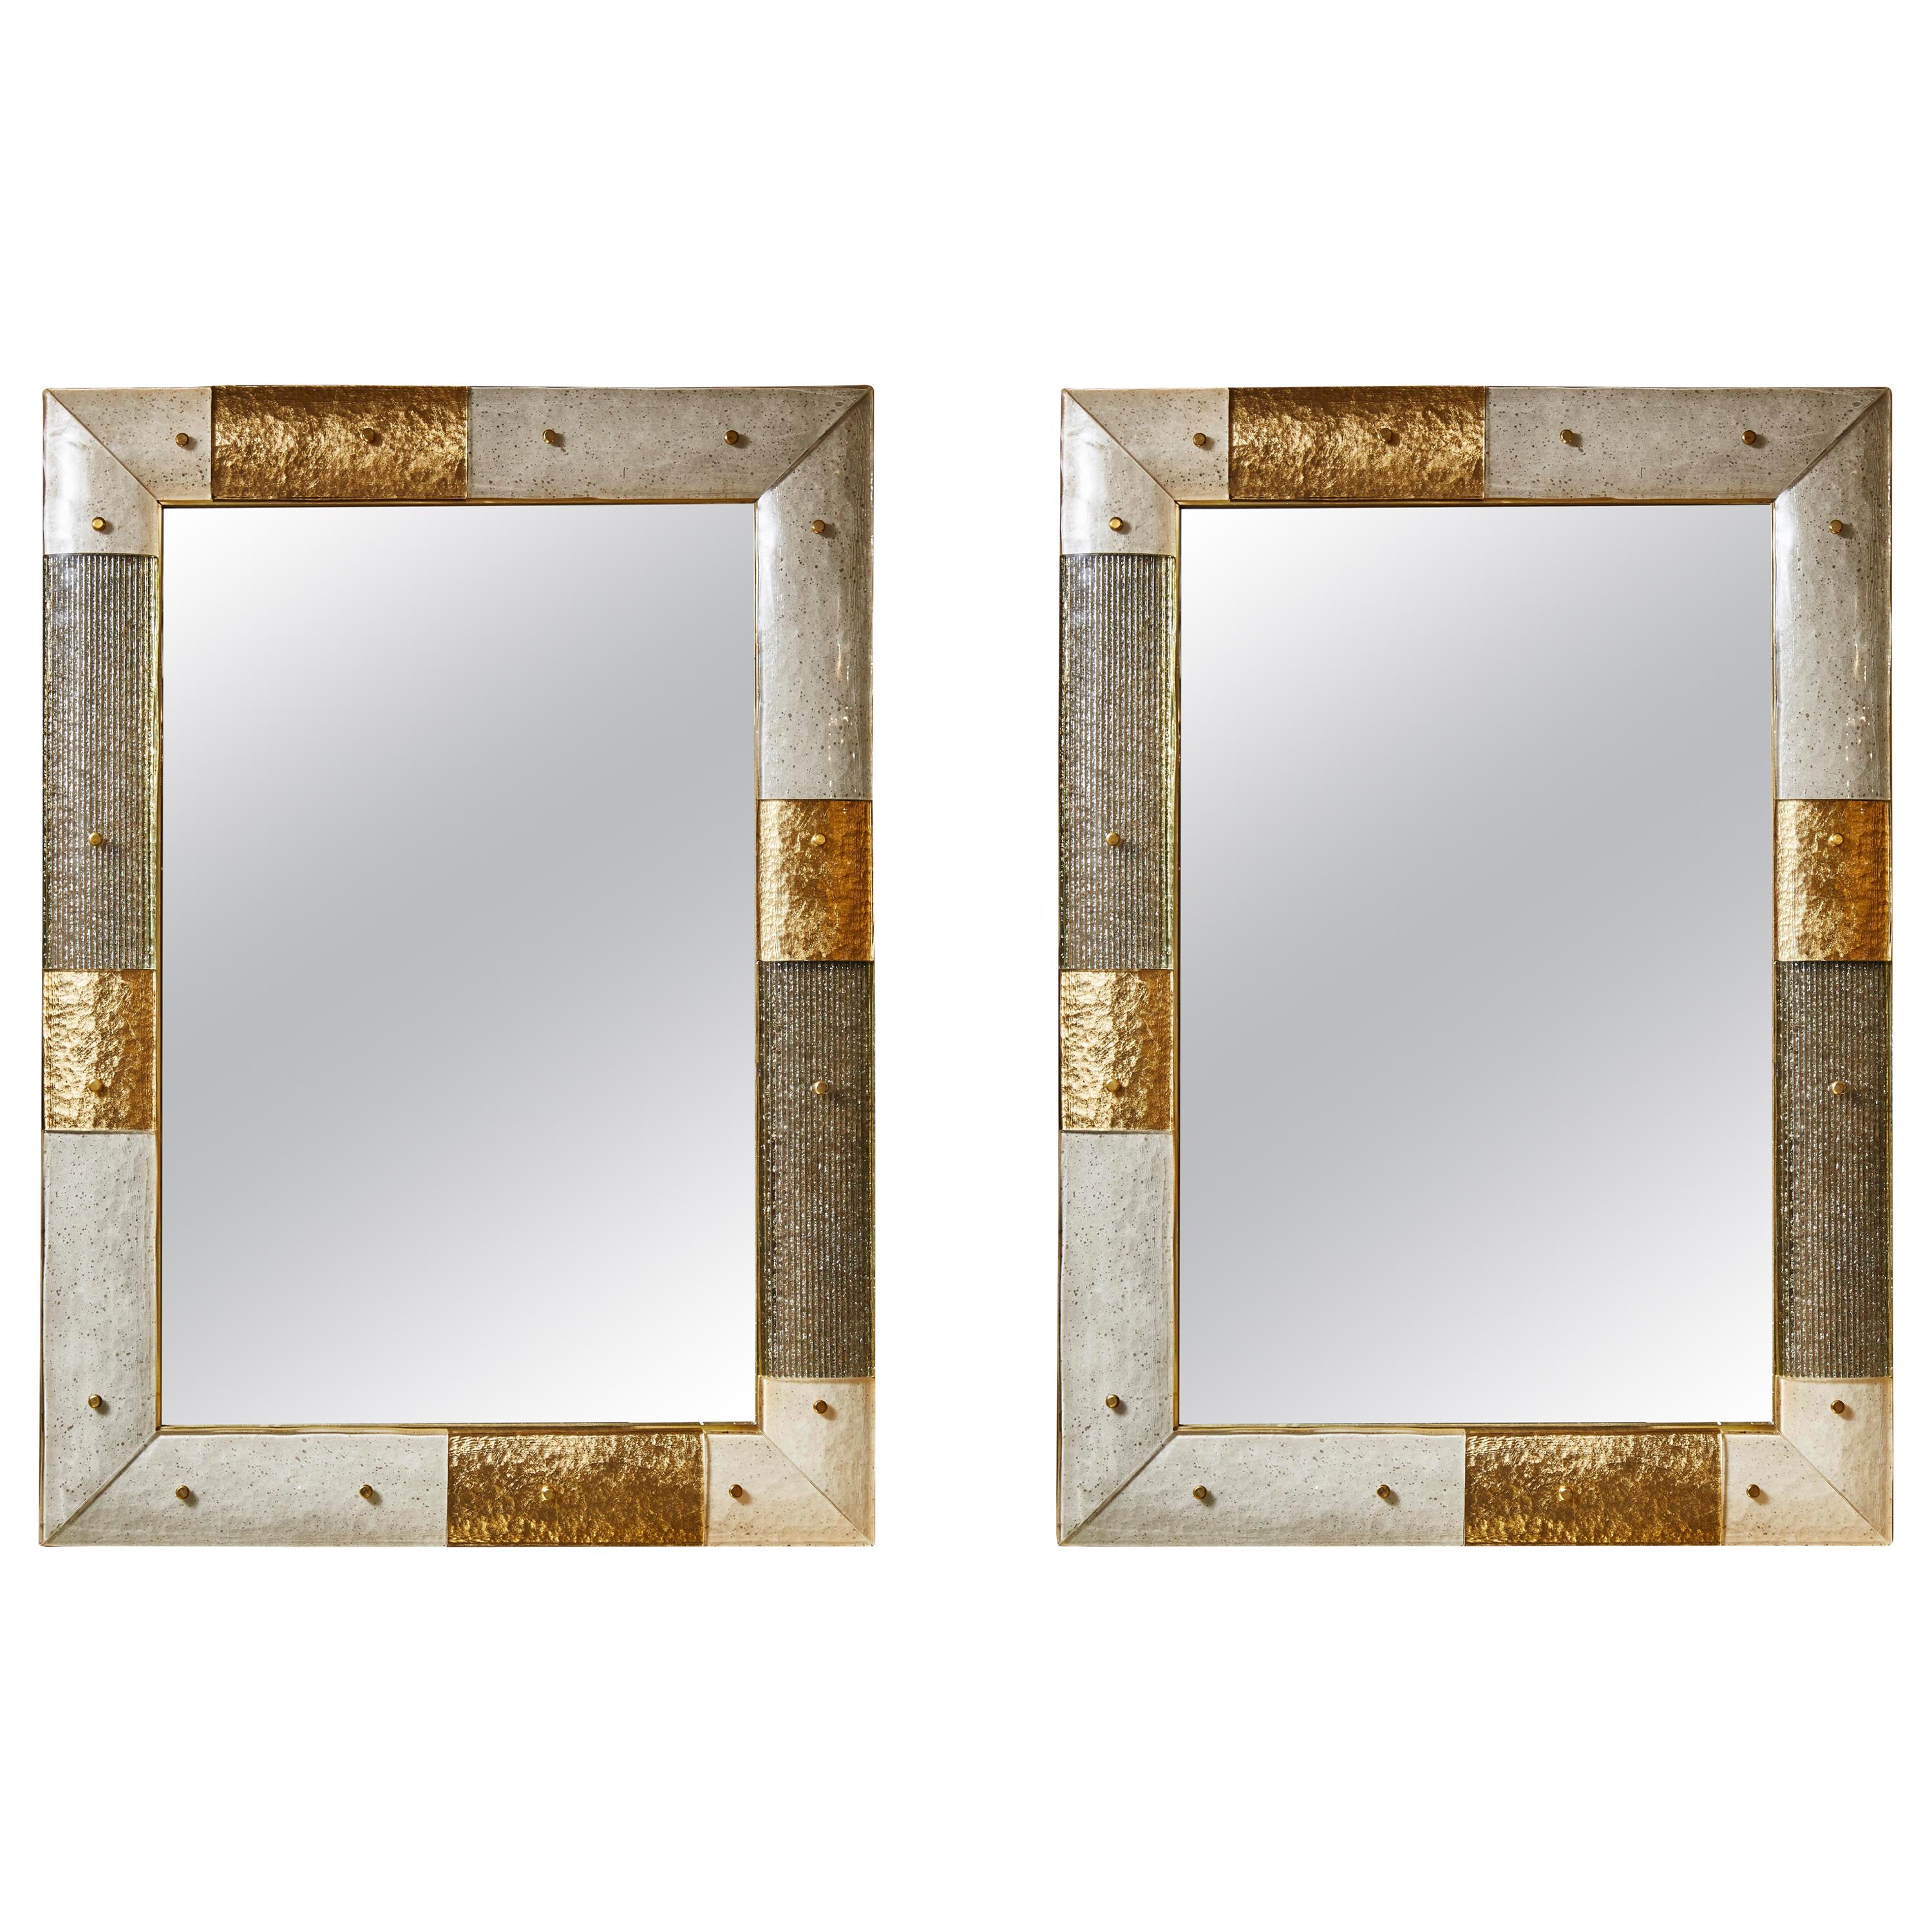 Pair of Vintage Mirrors in Murano Glass